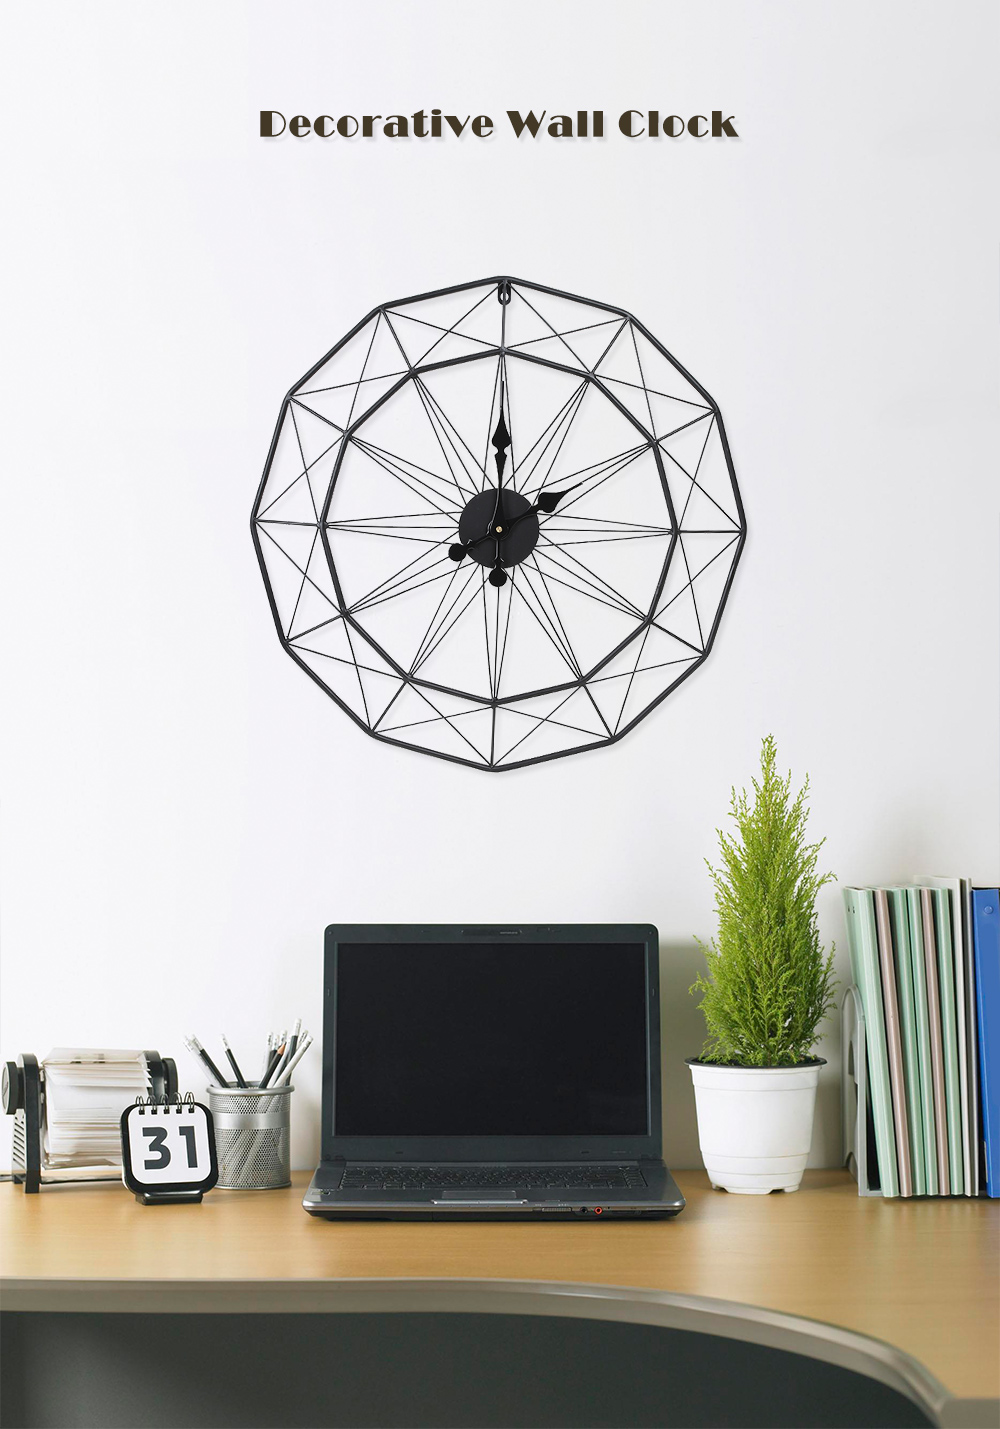 Wall Clock Decorative Hanging Watch for Home Office Bar